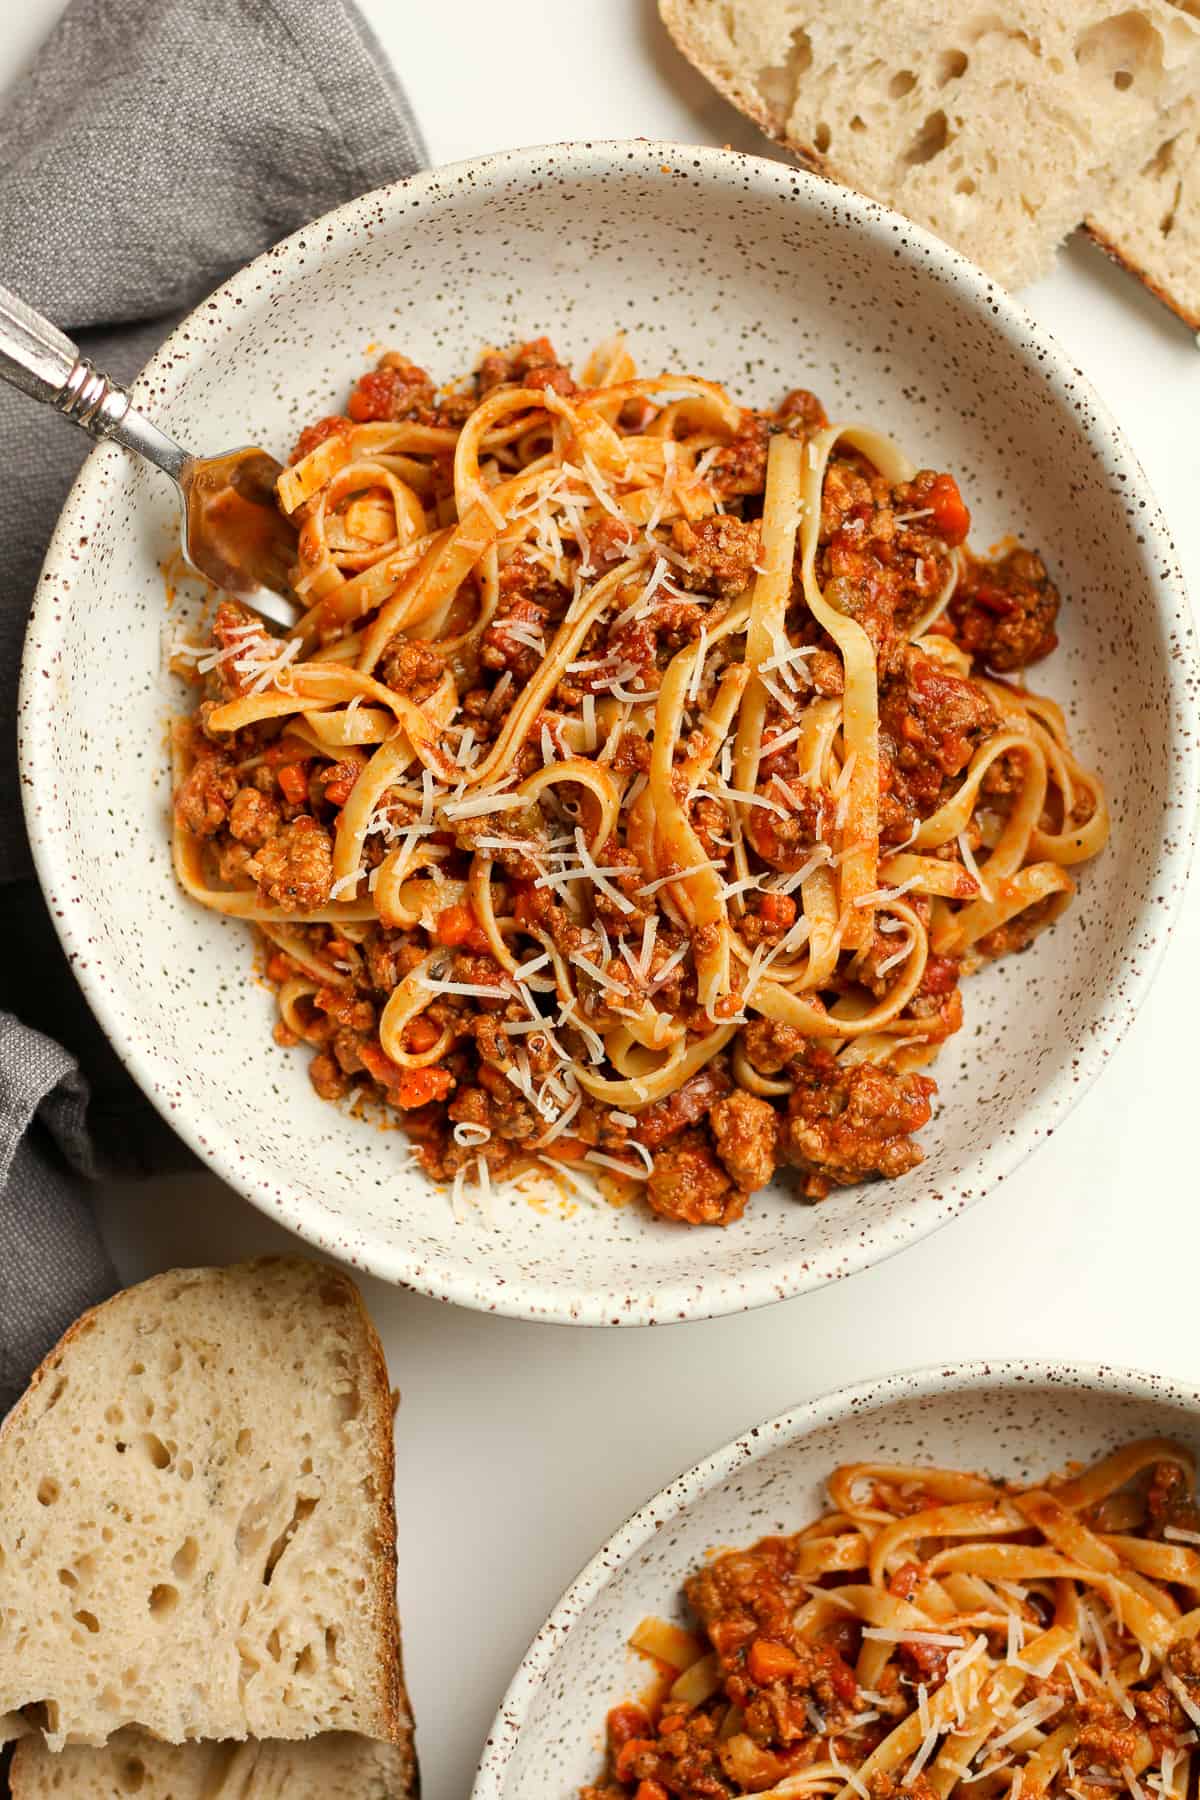 Two bowls of fettuccini with bolognese sauce.